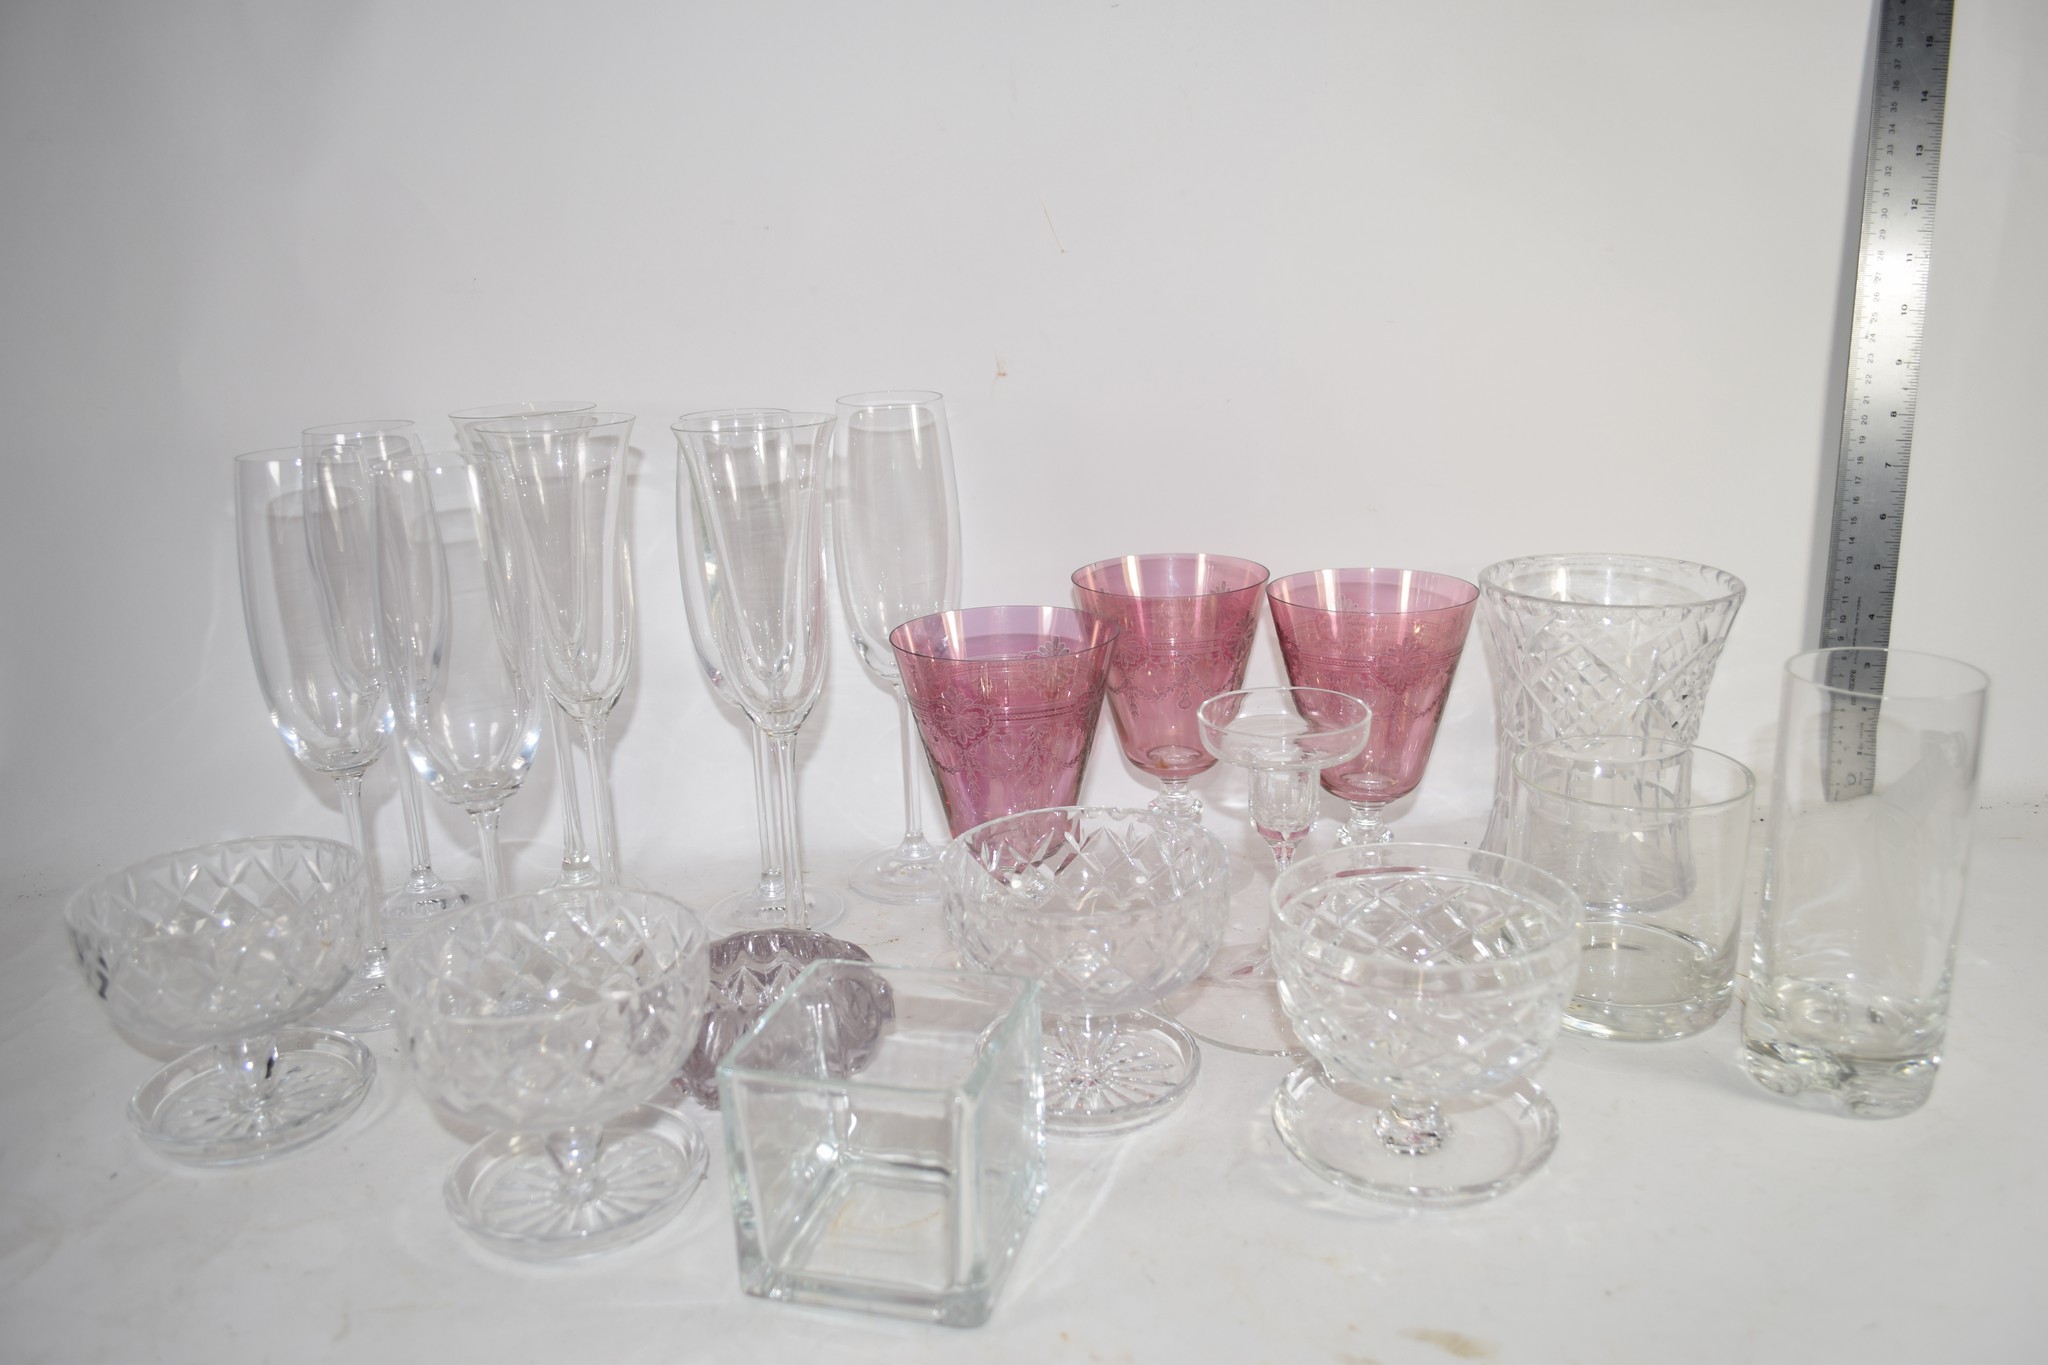 BOX CONTAINING GLASS WARES, CHAMPAGNE FLUTES ETC